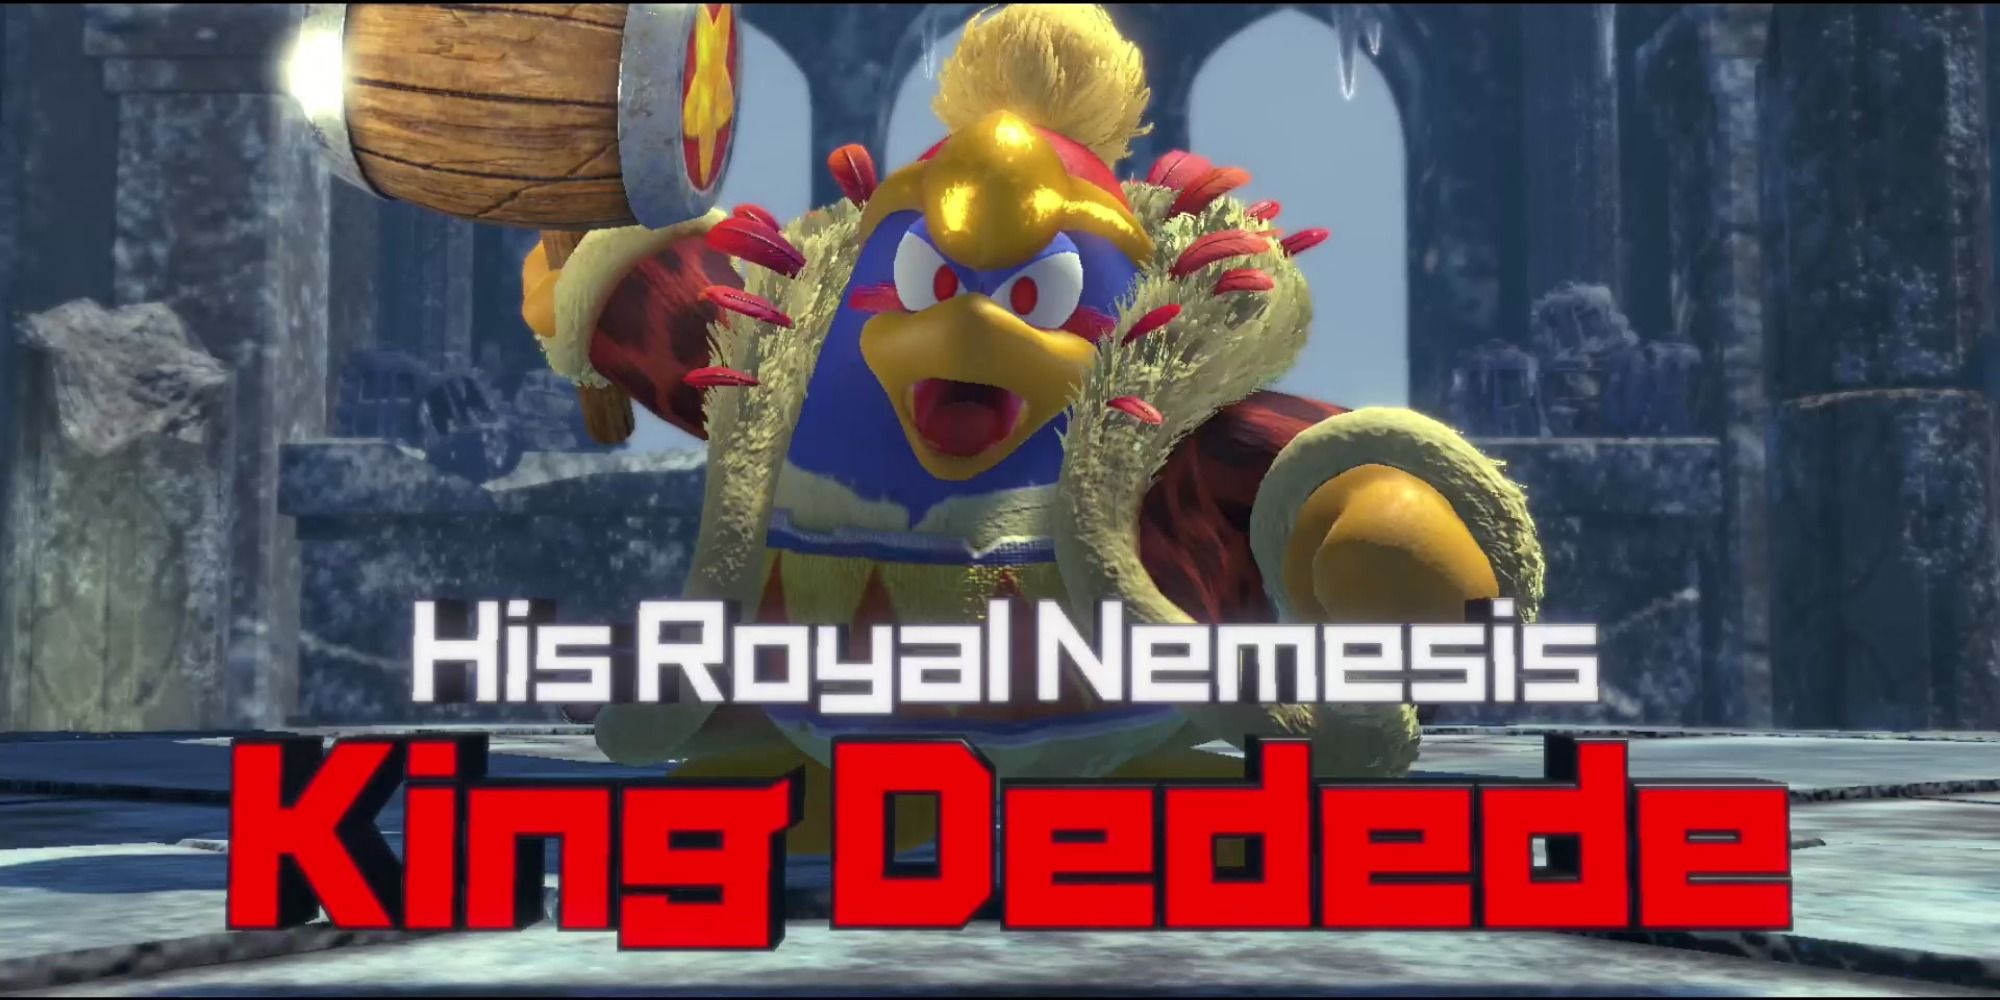 His Royal Nemesis King Dedede boss fight from Kirby and the Forgotten Land